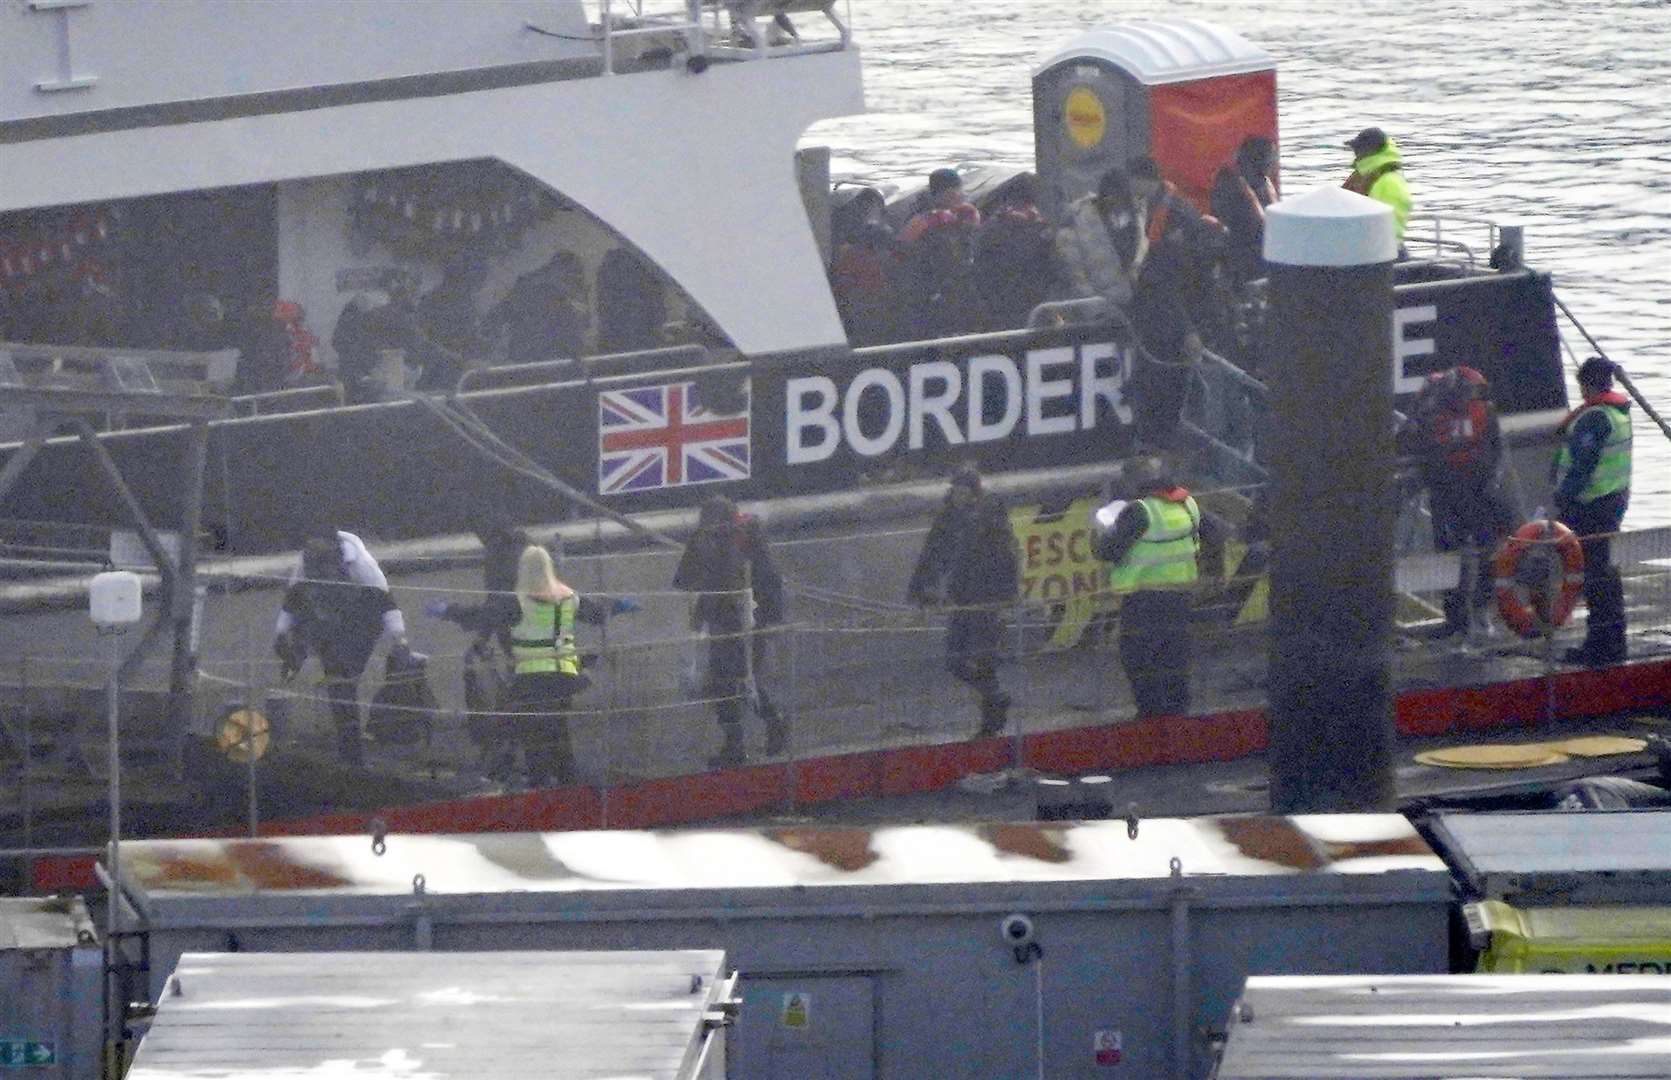 A group of people, thought to be migrants, were brought in to Dover, Kent, on Saturday (Gareth Fuller/PA)